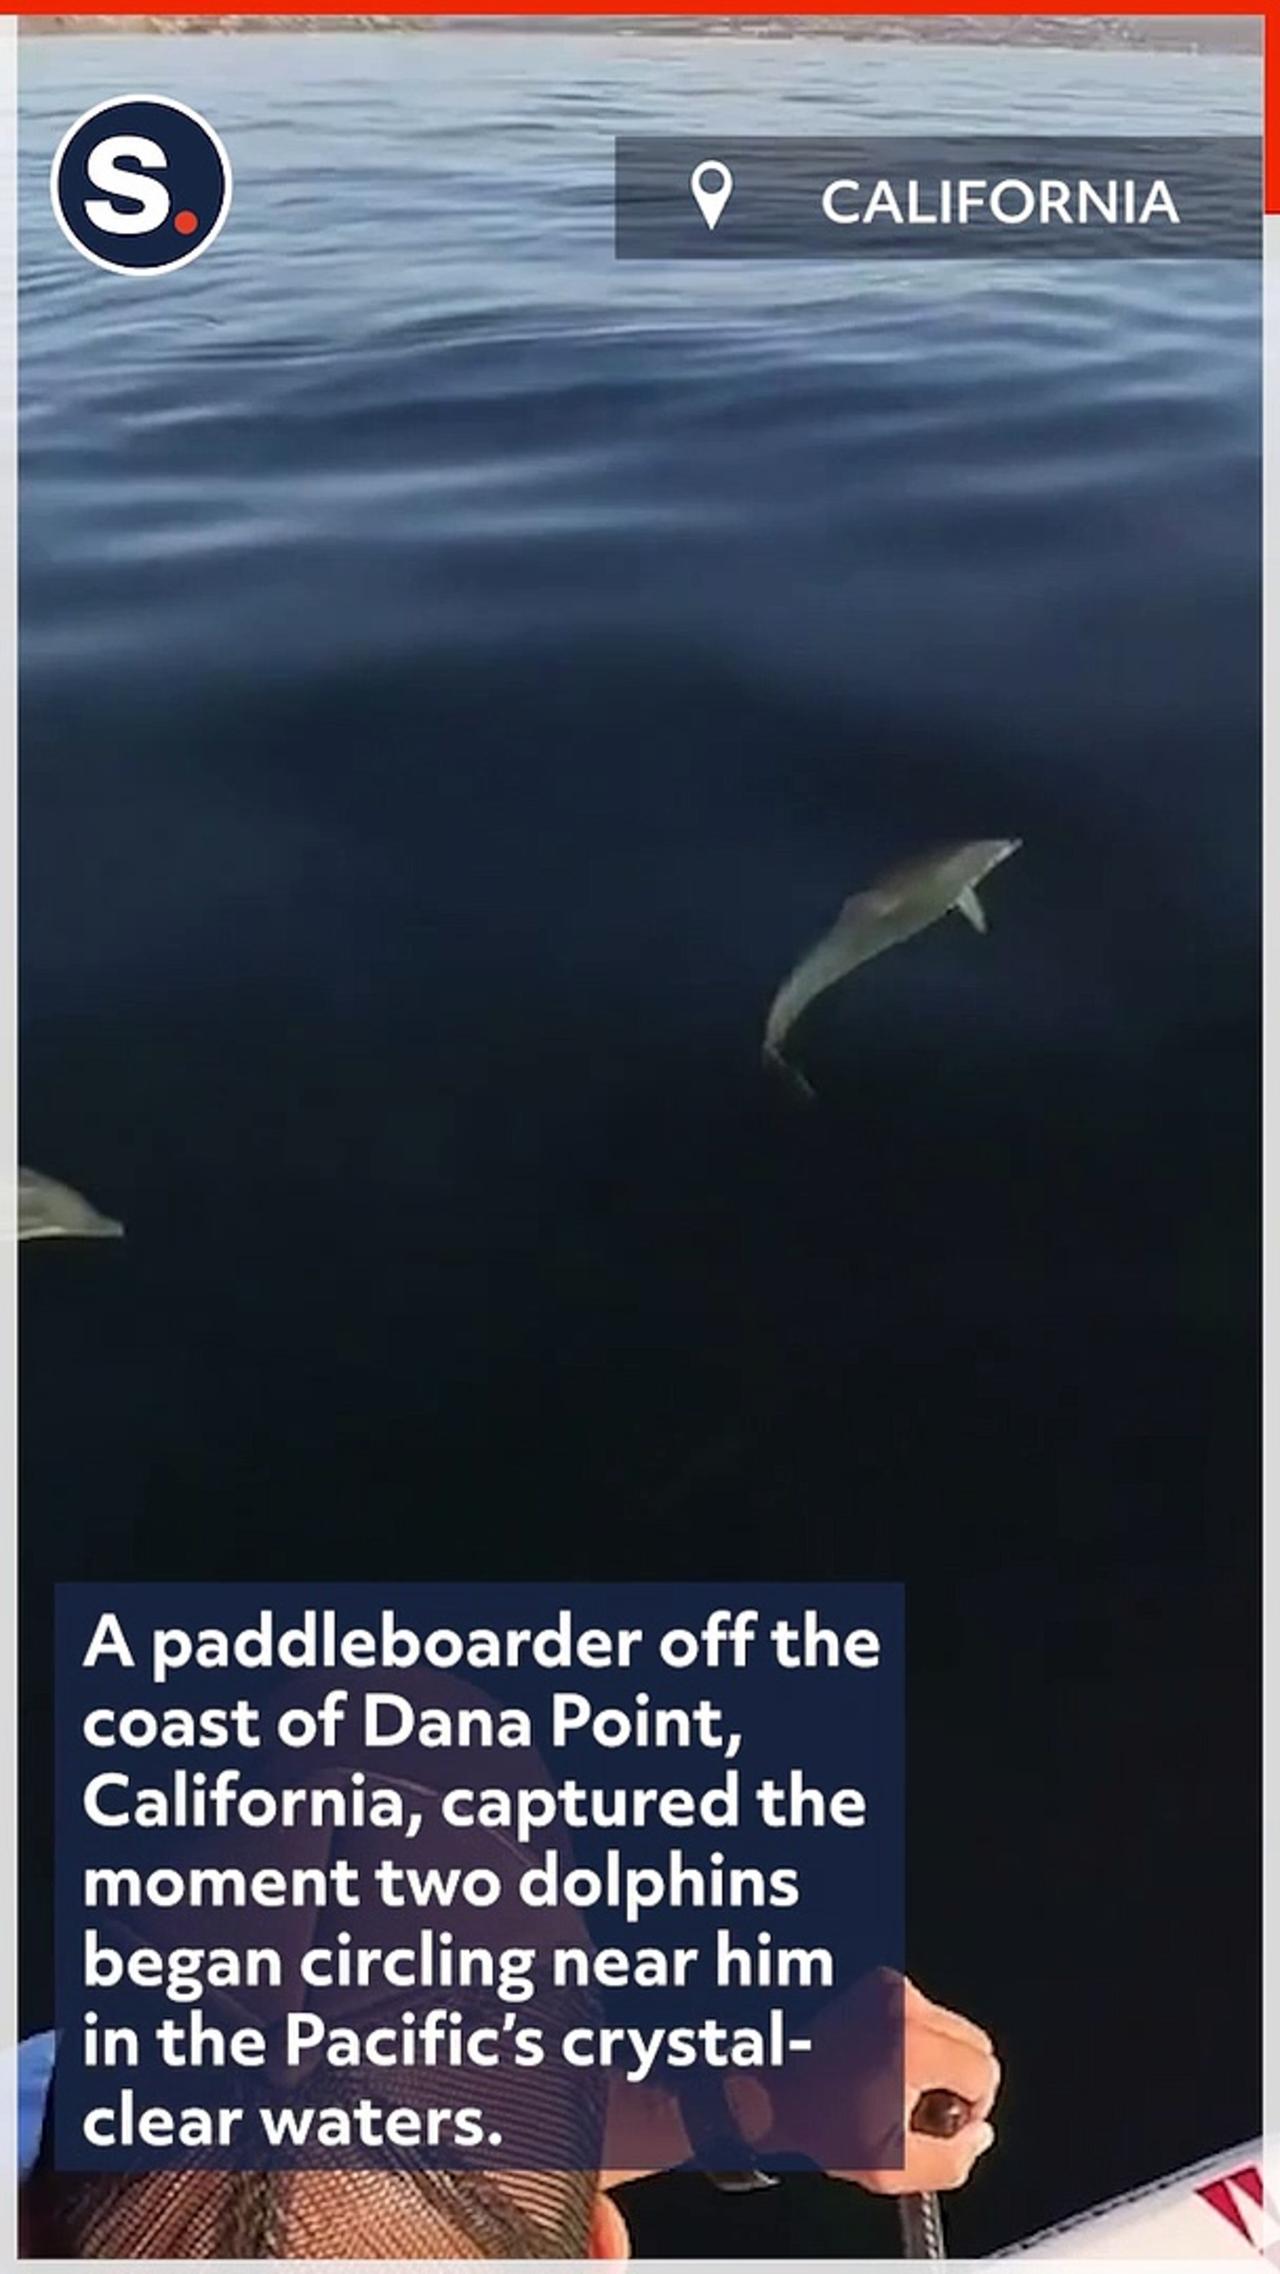 Dolphins Circle Paddleboarder in Crystal-Clear California Waters